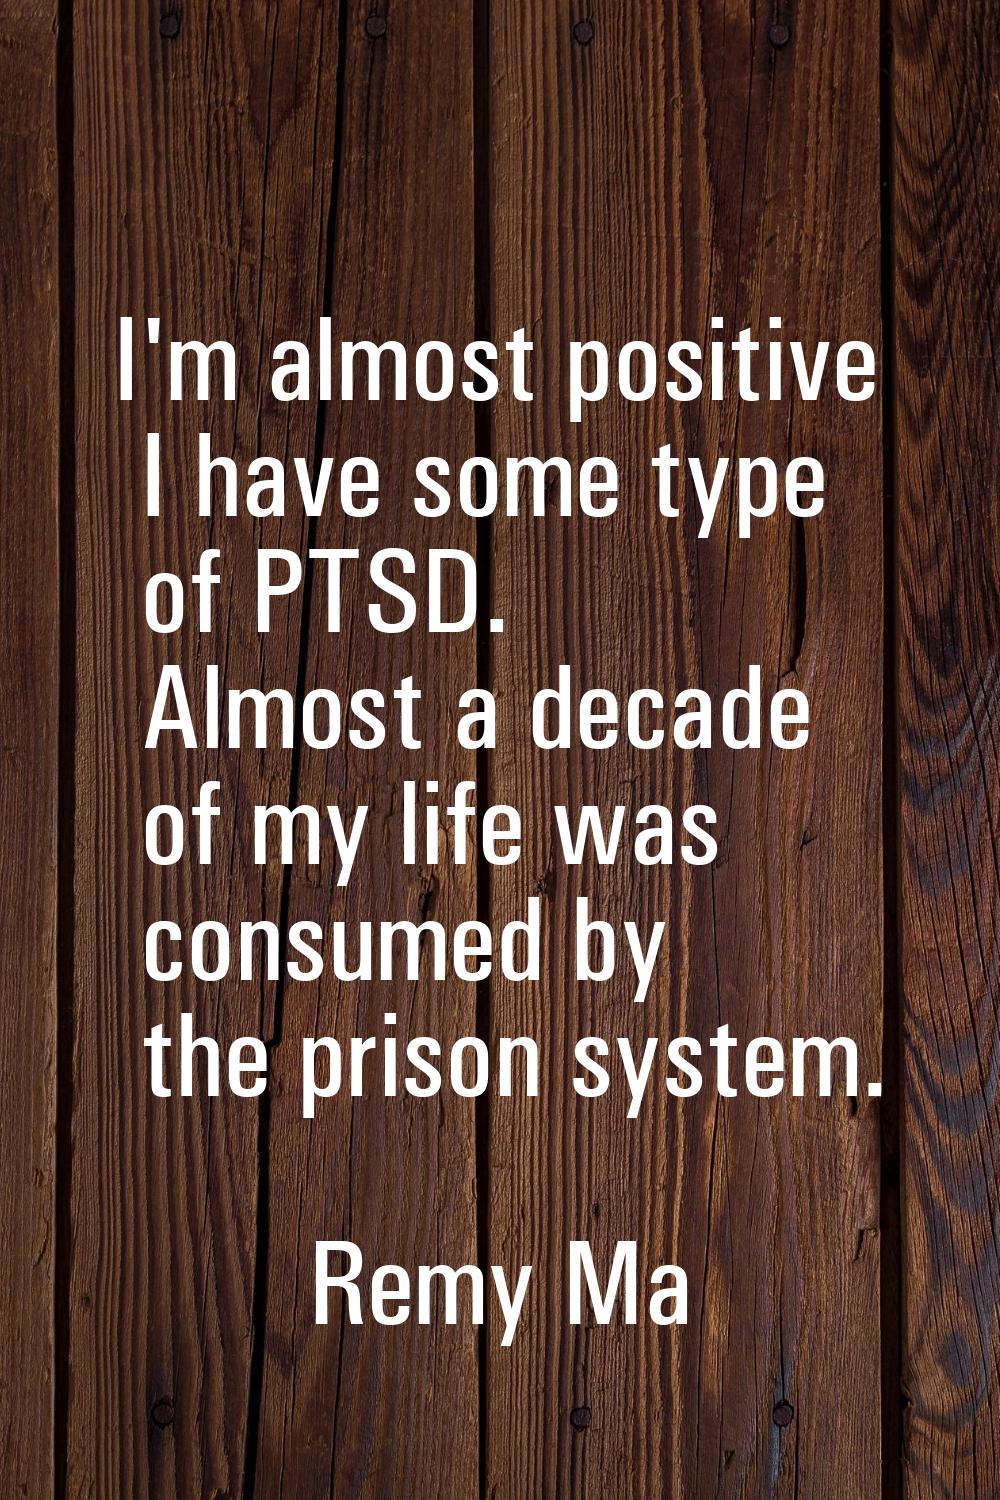 I'm almost positive I have some type of PTSD. Almost a decade of my life was consumed by the prison